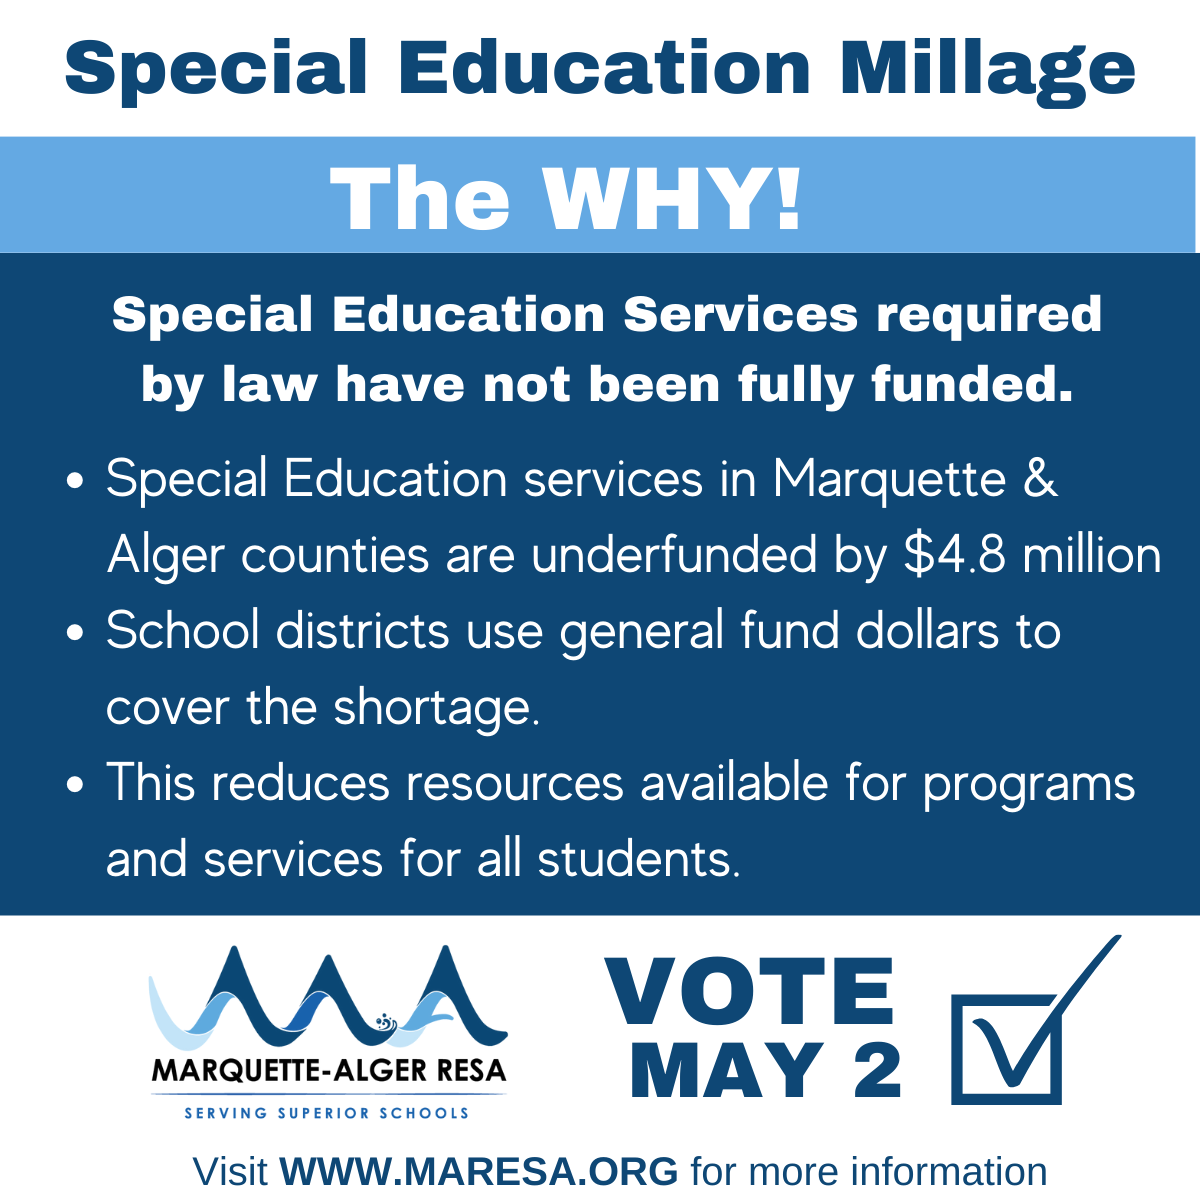 The WHY! Special Education services required by law have not been fully funded.